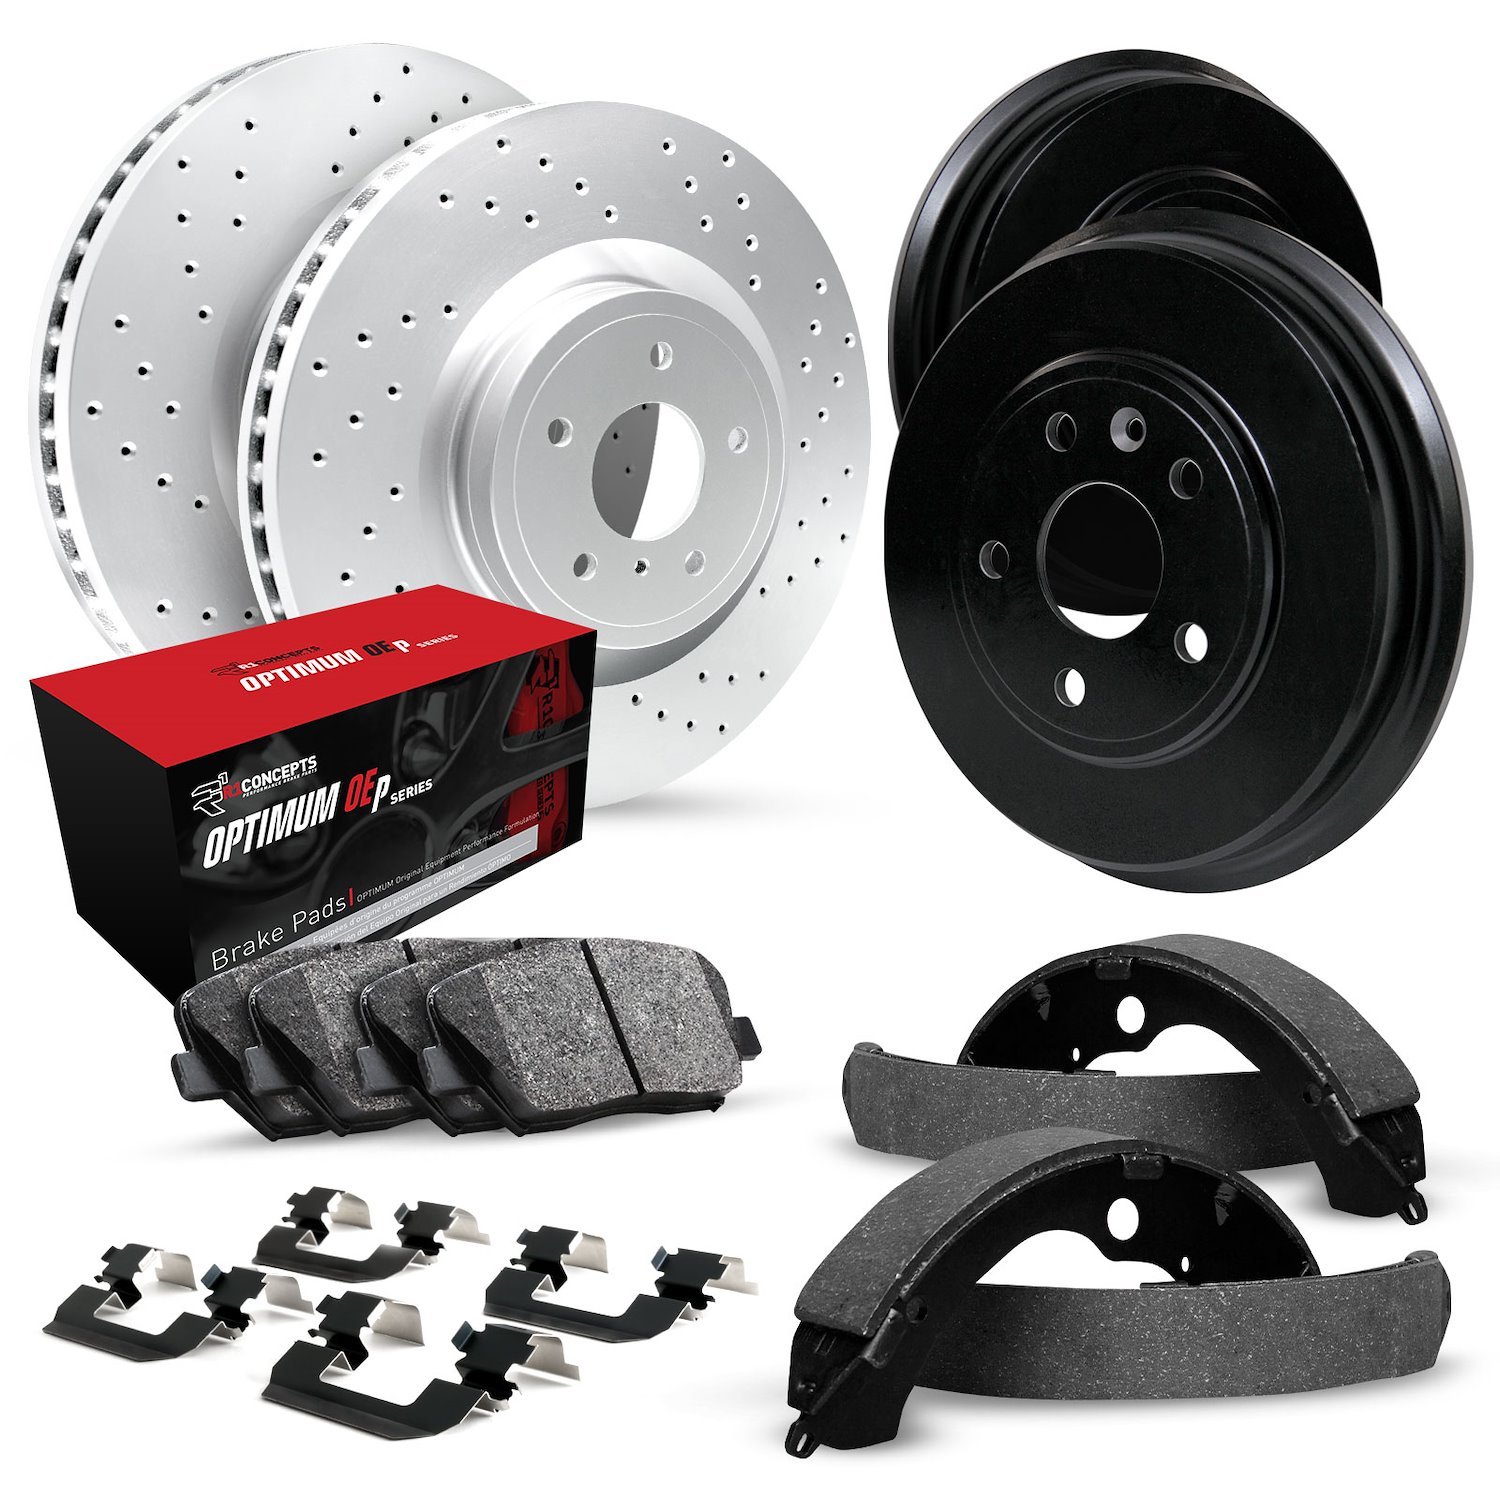 GEO-Carbon Drilled Brake Rotor & Drum Set w/Optimum OE Pads, Shoes, & Hardware, 1978-1993 GM, Position: Front & Rear